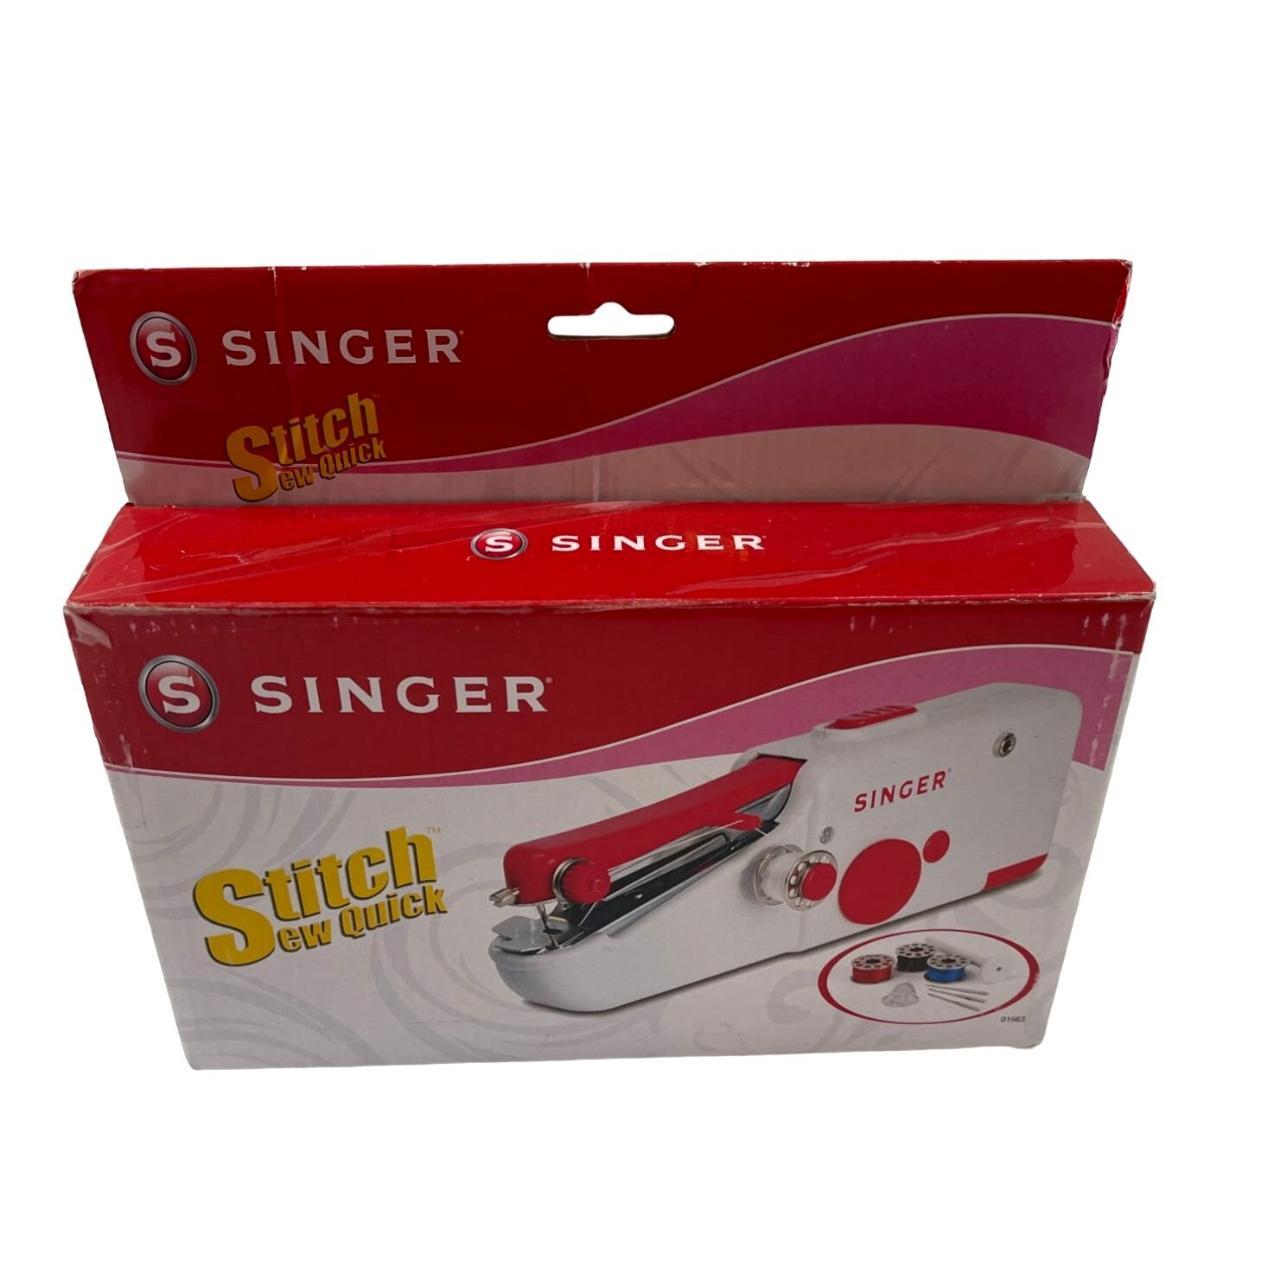 New Singer Stitch Sew Quick Hand-Held Sewing